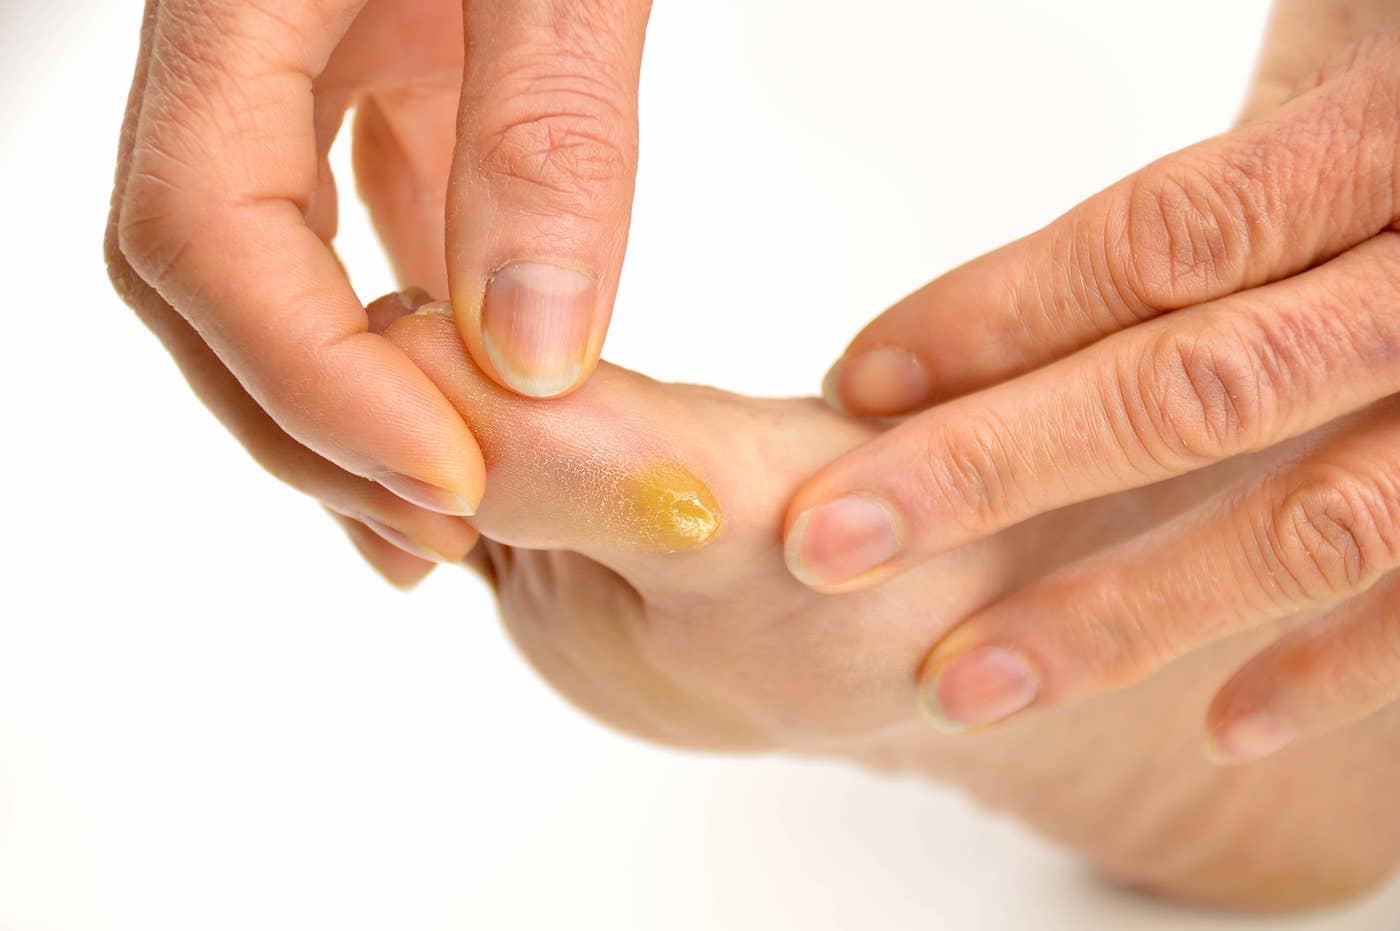 How to Get Rid of Calluses: Treatments and Home Remedies